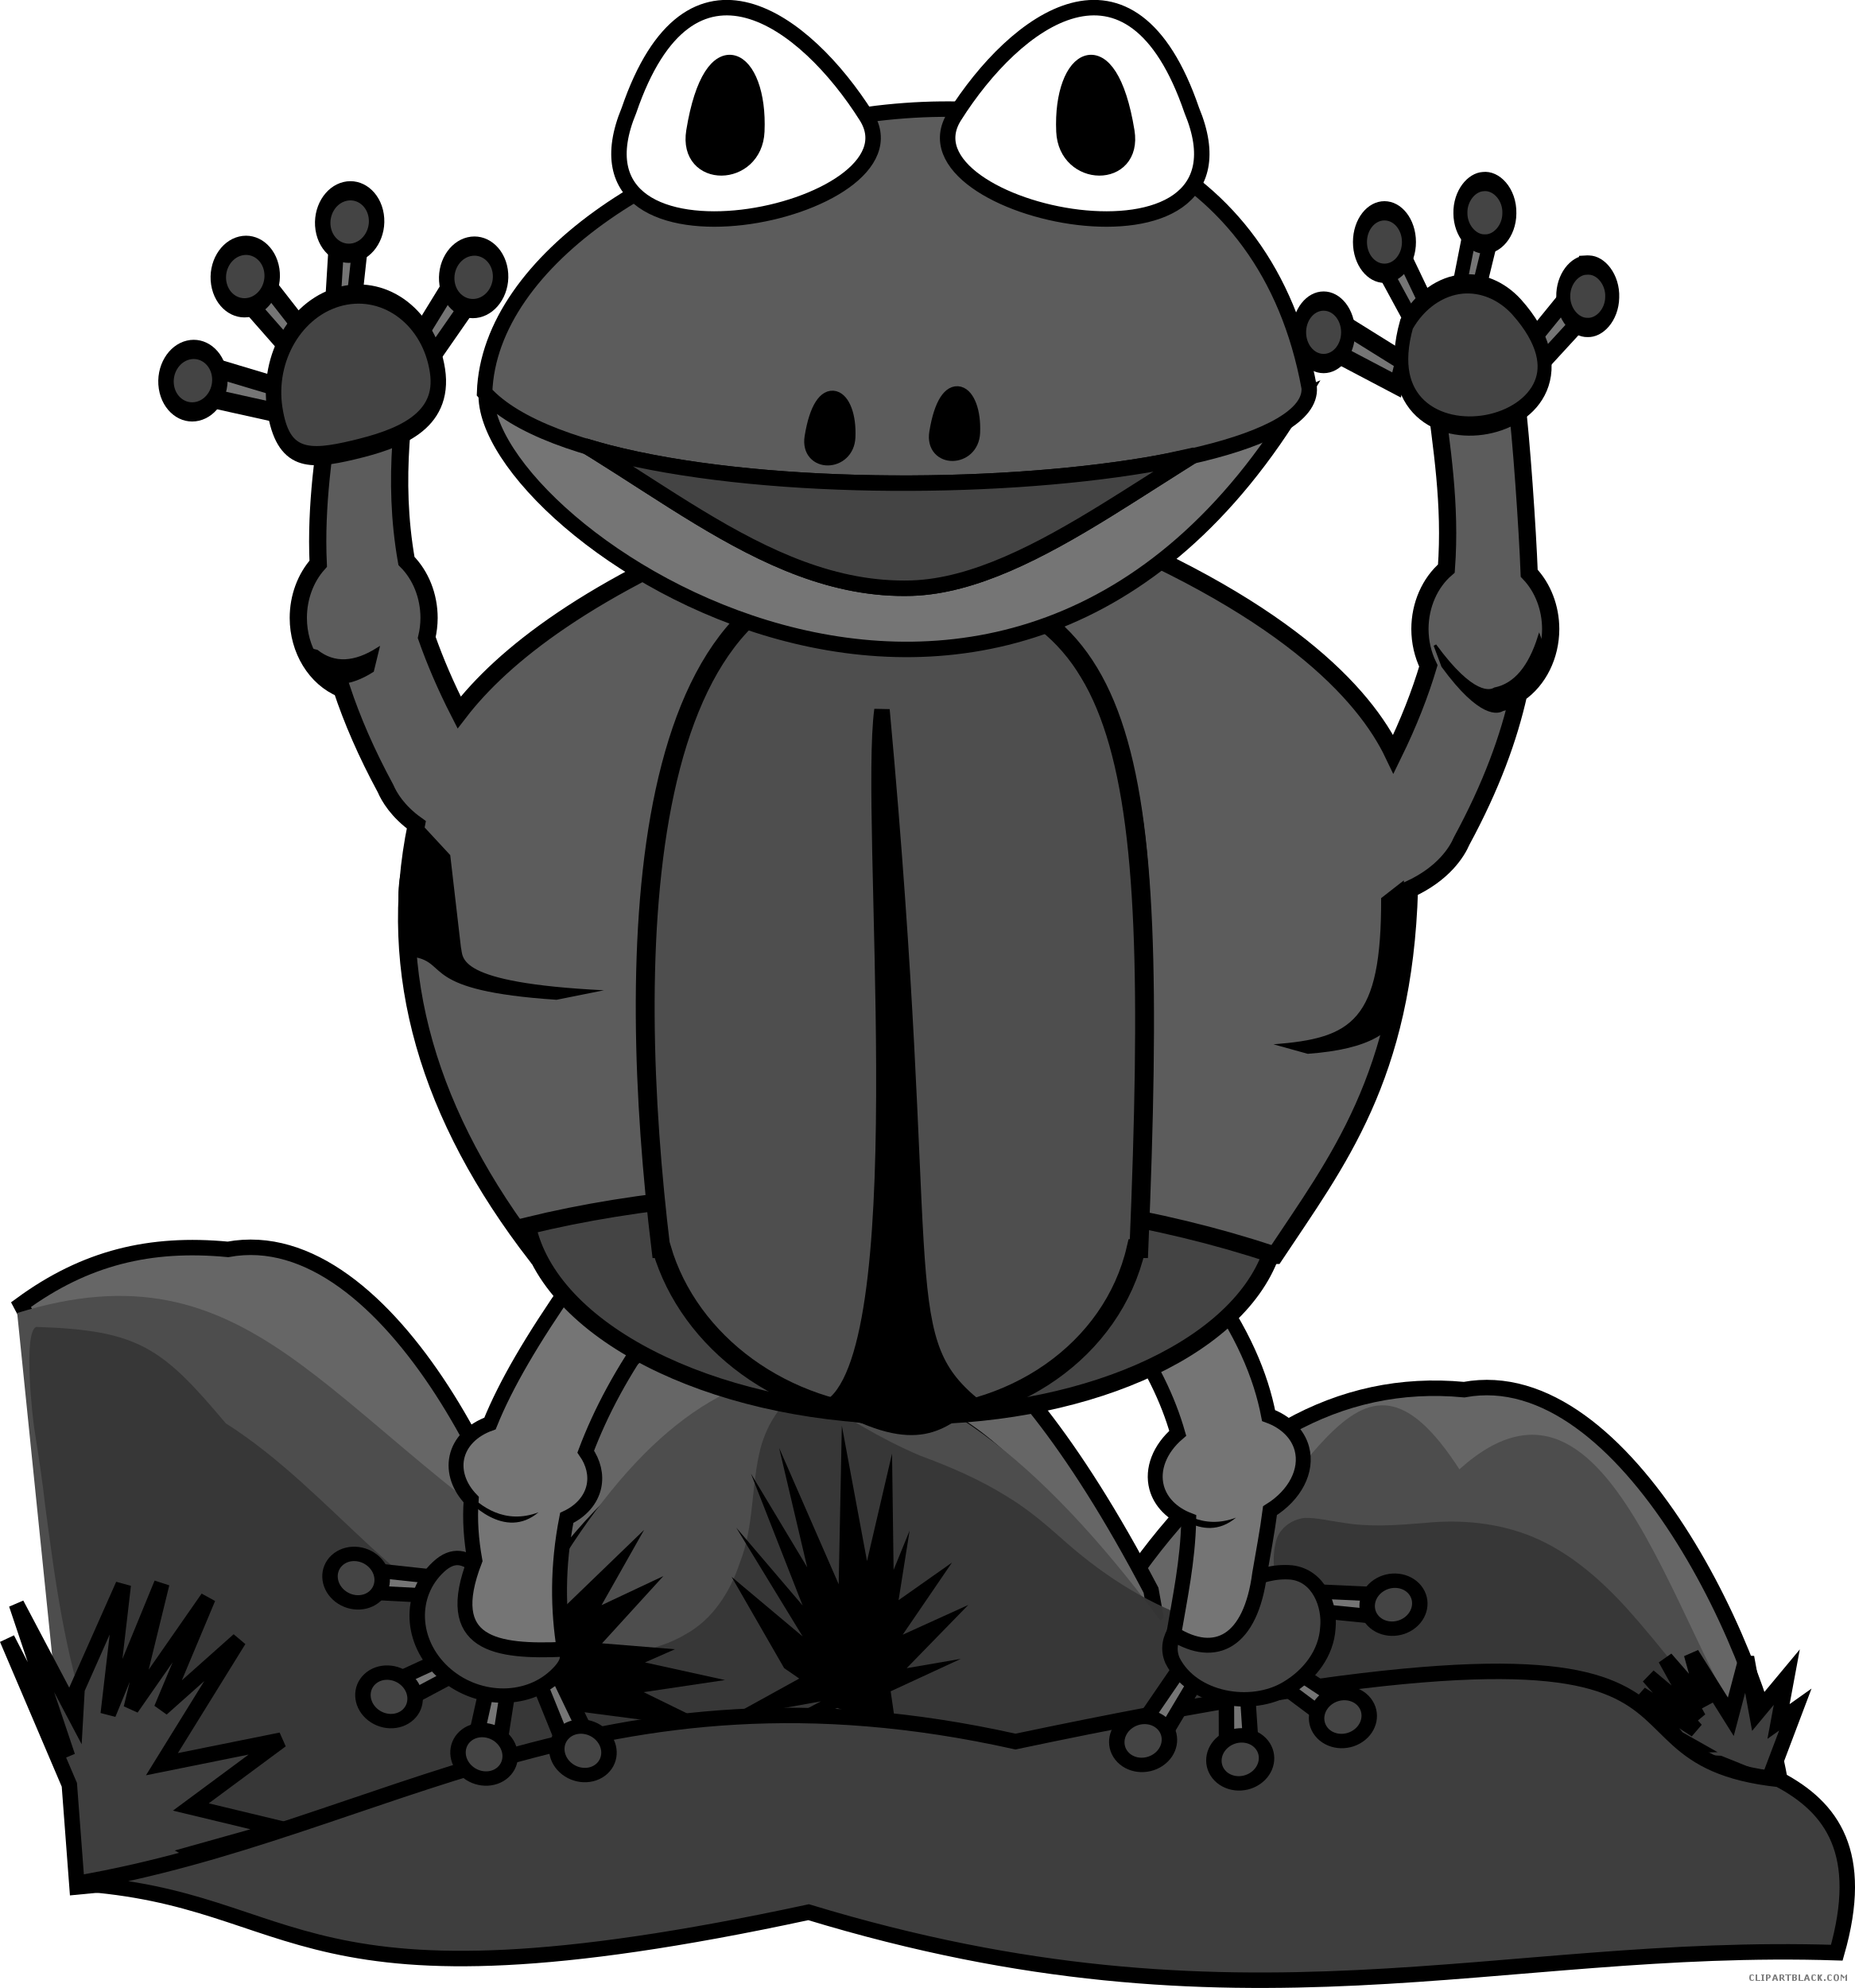 Jumping Frog Animal Free Black White Clipart Images - Frog (2333x2500)